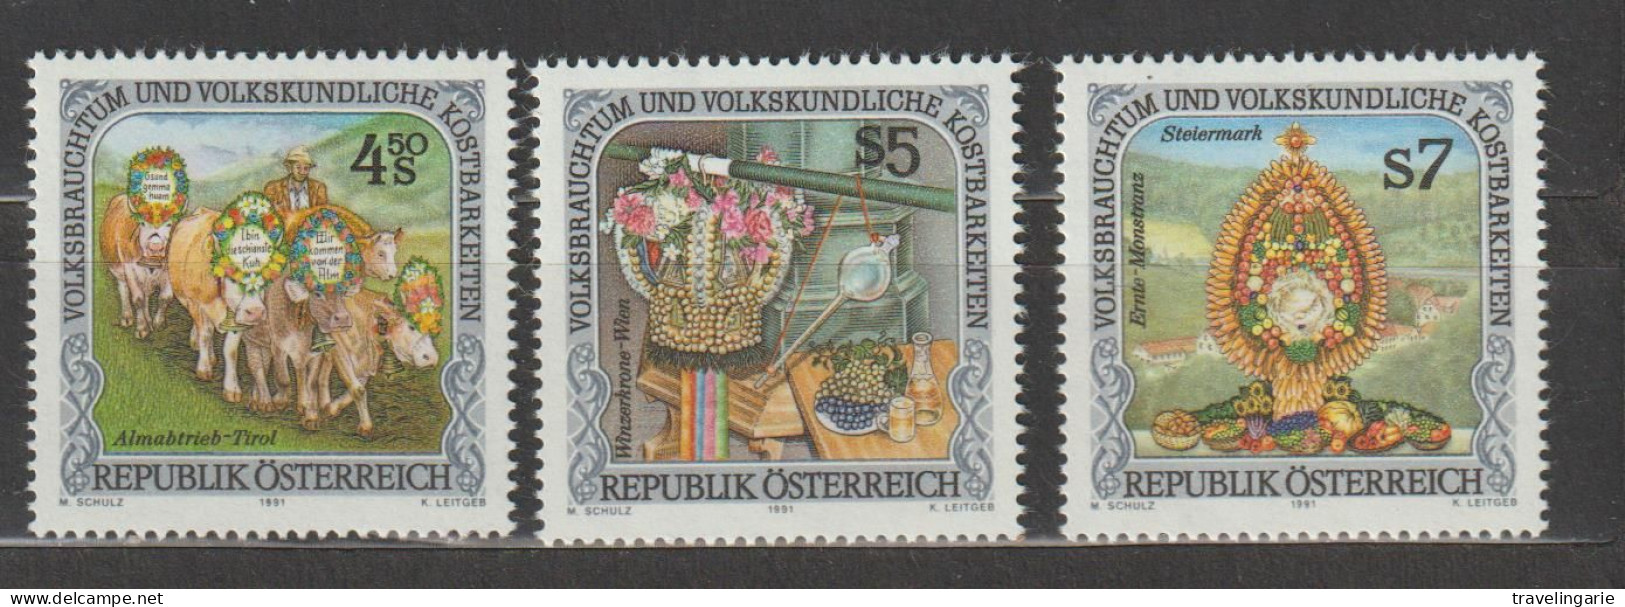 Austria 1991 Folklore And Costumes MNH - Unused Stamps